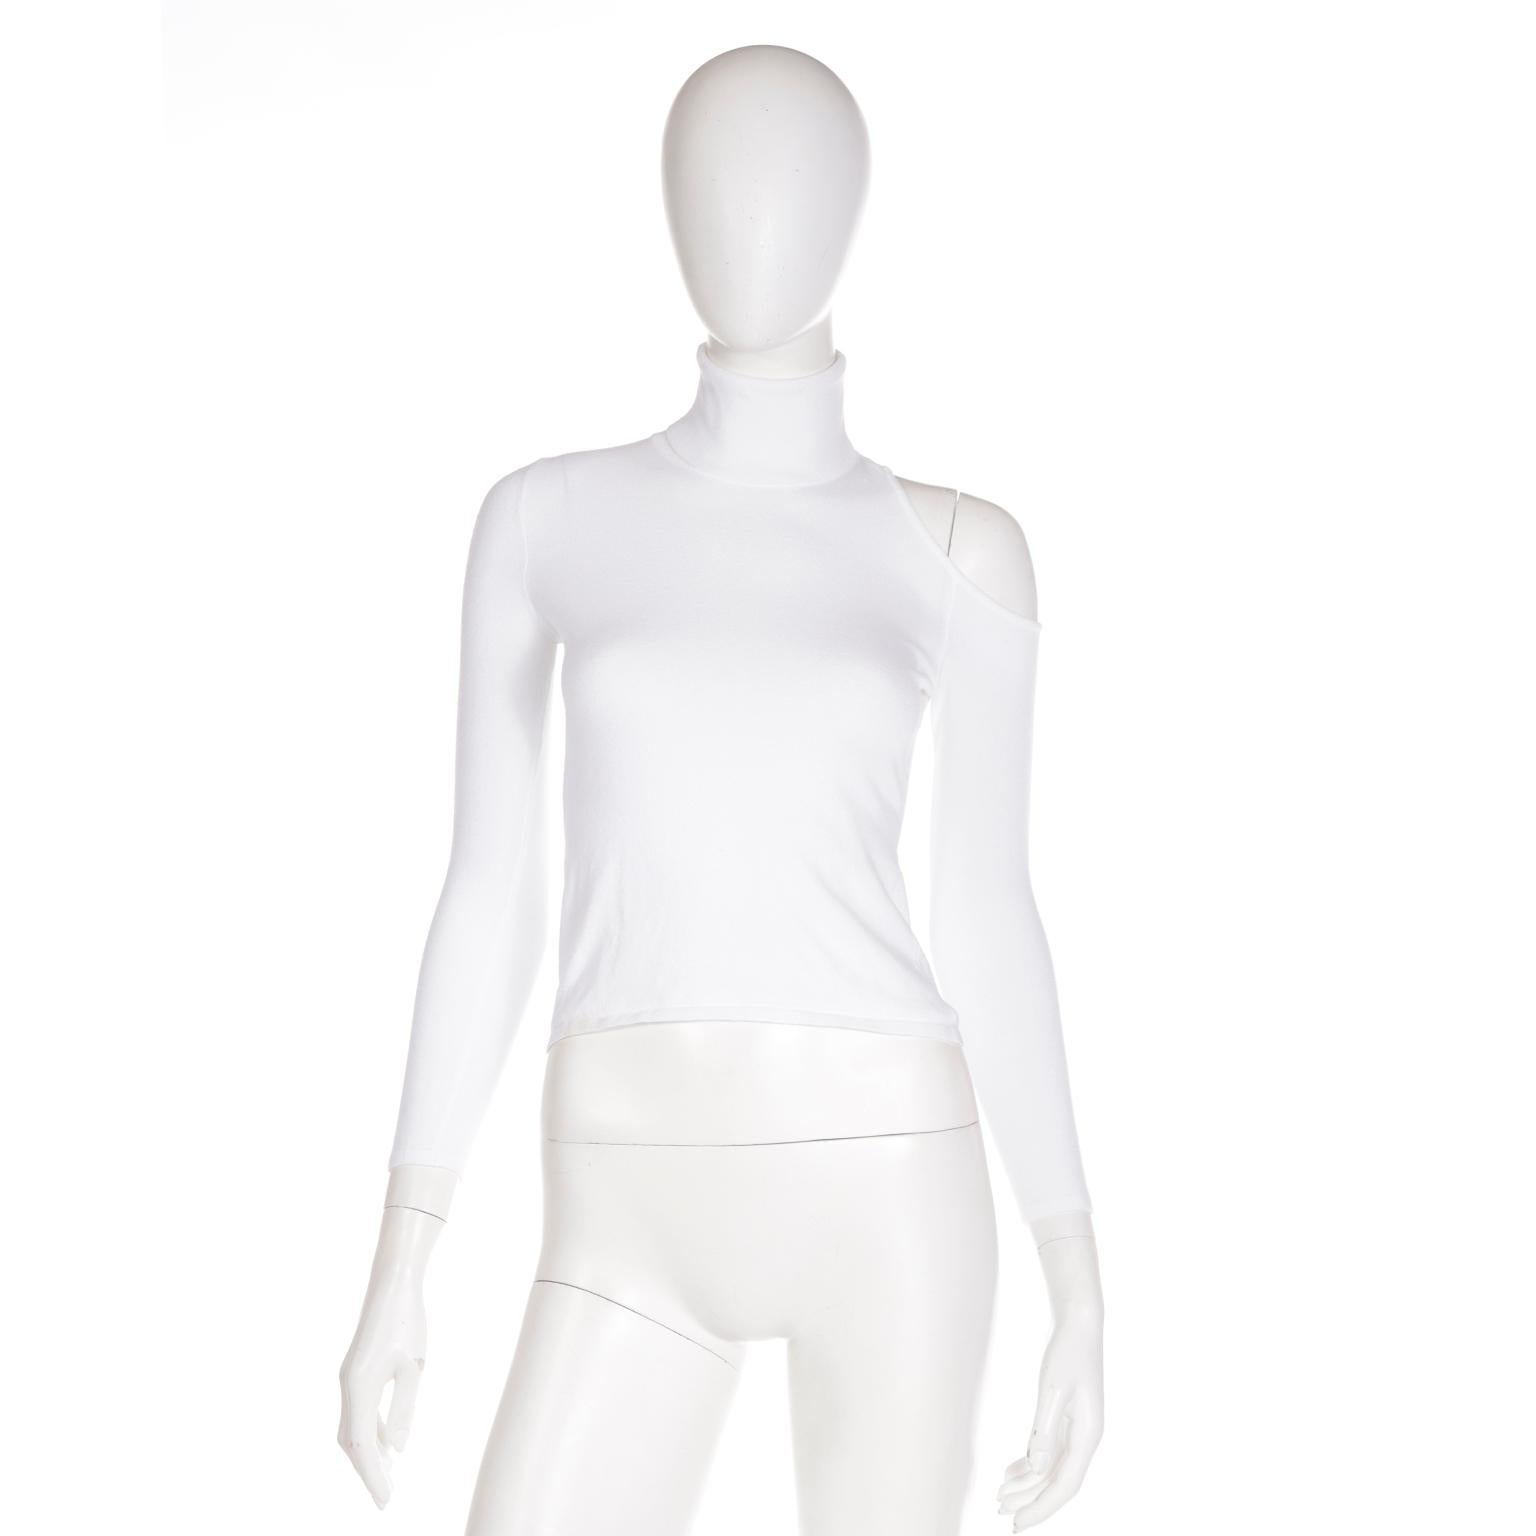 This fun Versace white turtleneck top has a unique cut out on one of the shoulders that extends to the back. This top would be a great staple for any Summer wardrobe and it can be worn with a variety of things you already own! The top is in a soft